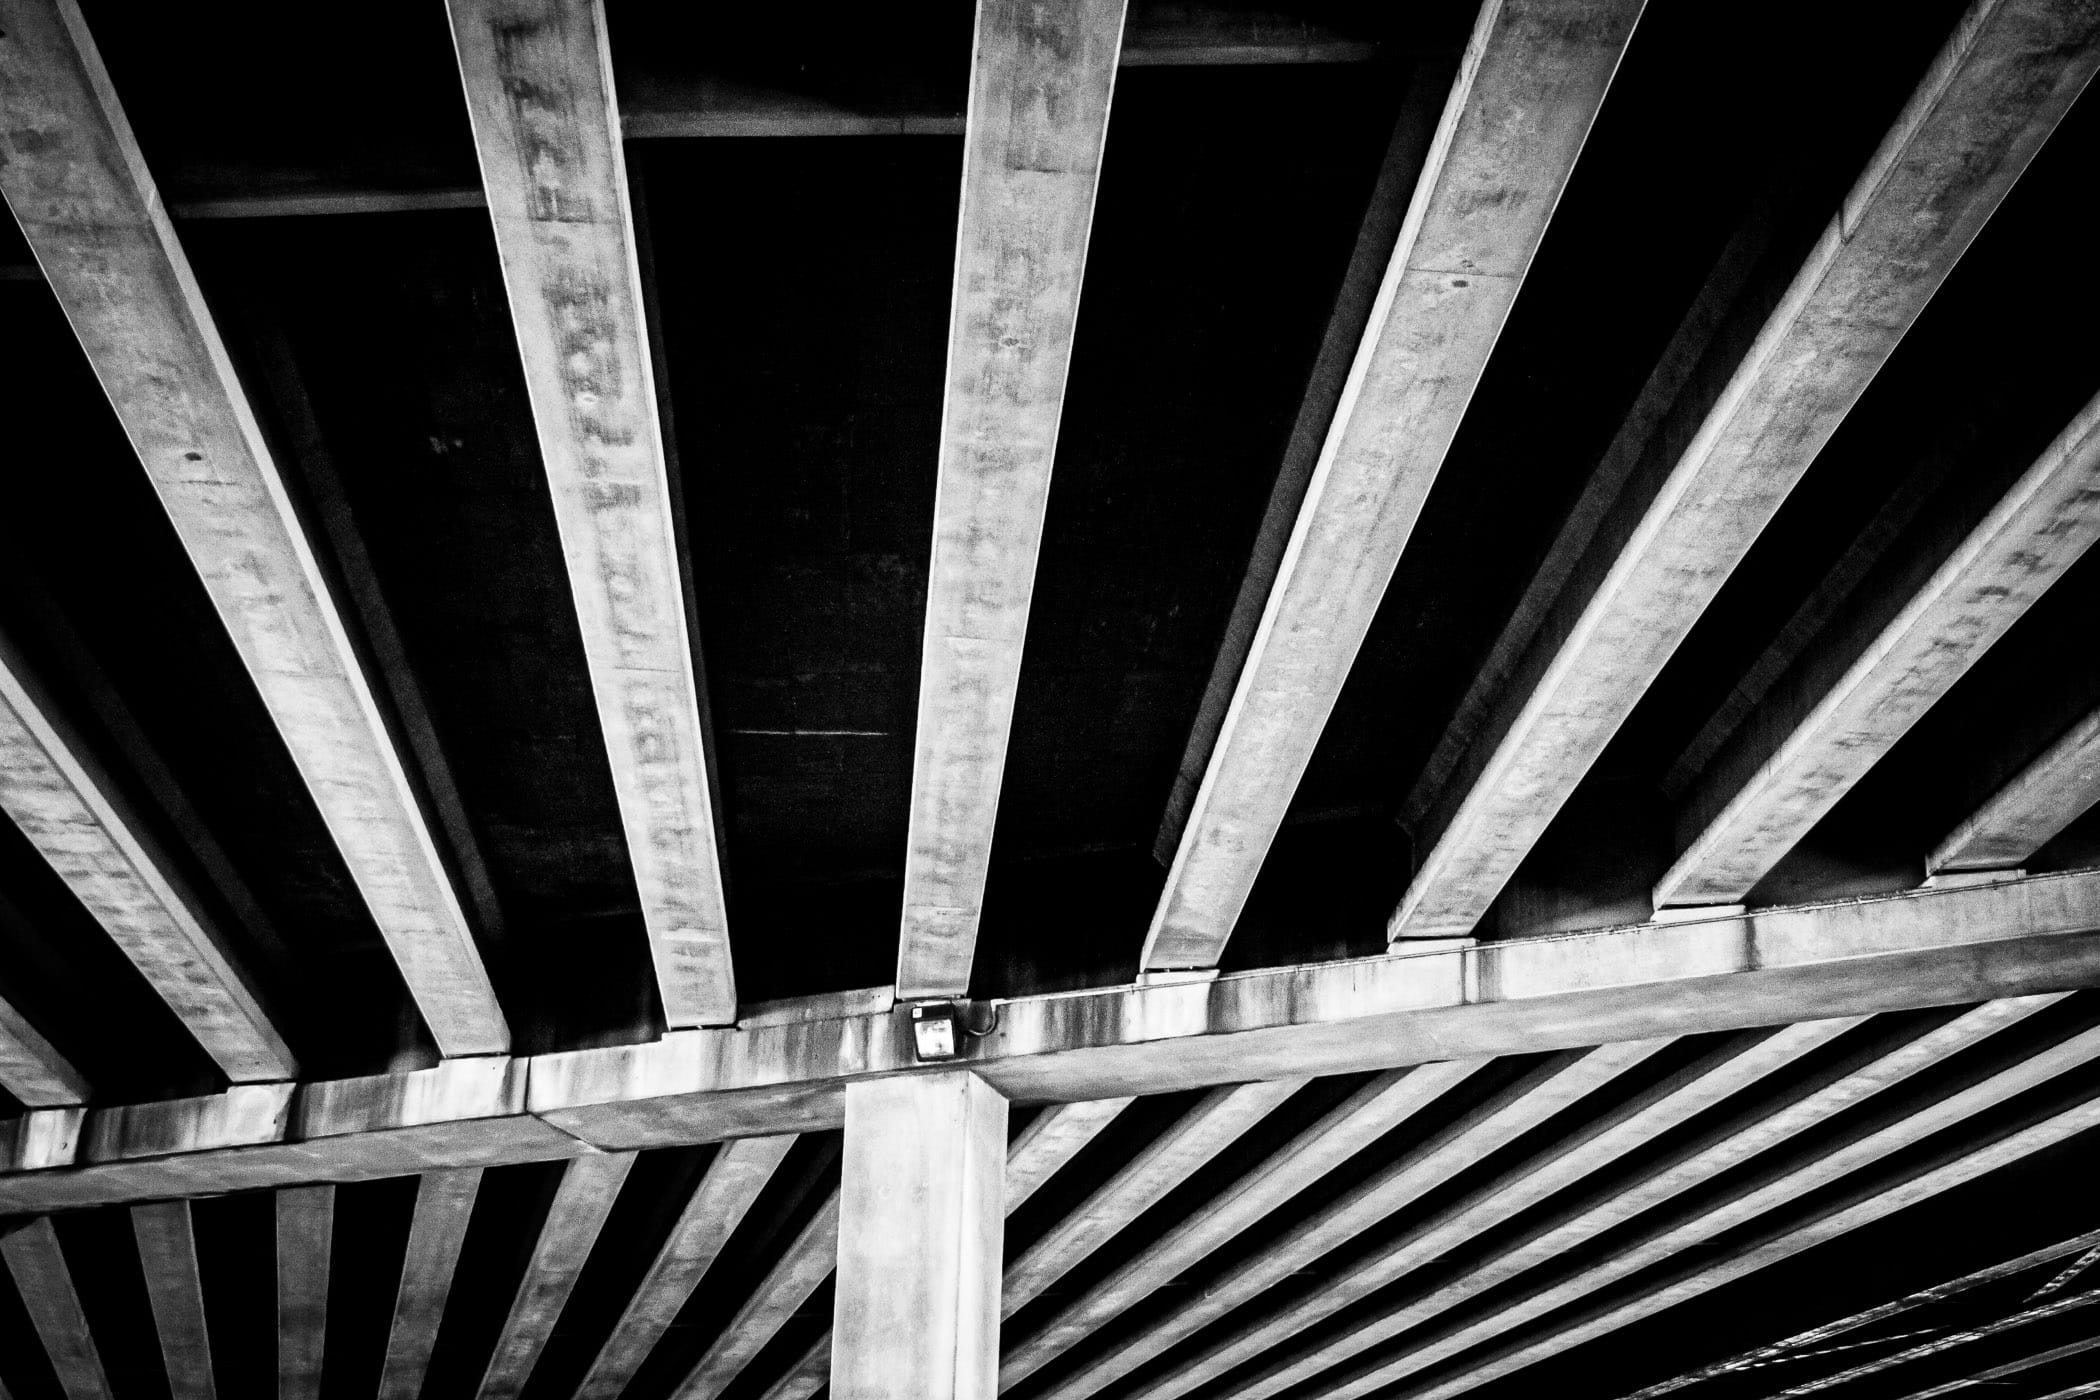 The underside of Dallas' Woodall Rogers Freeway between Downtown and Uptown.